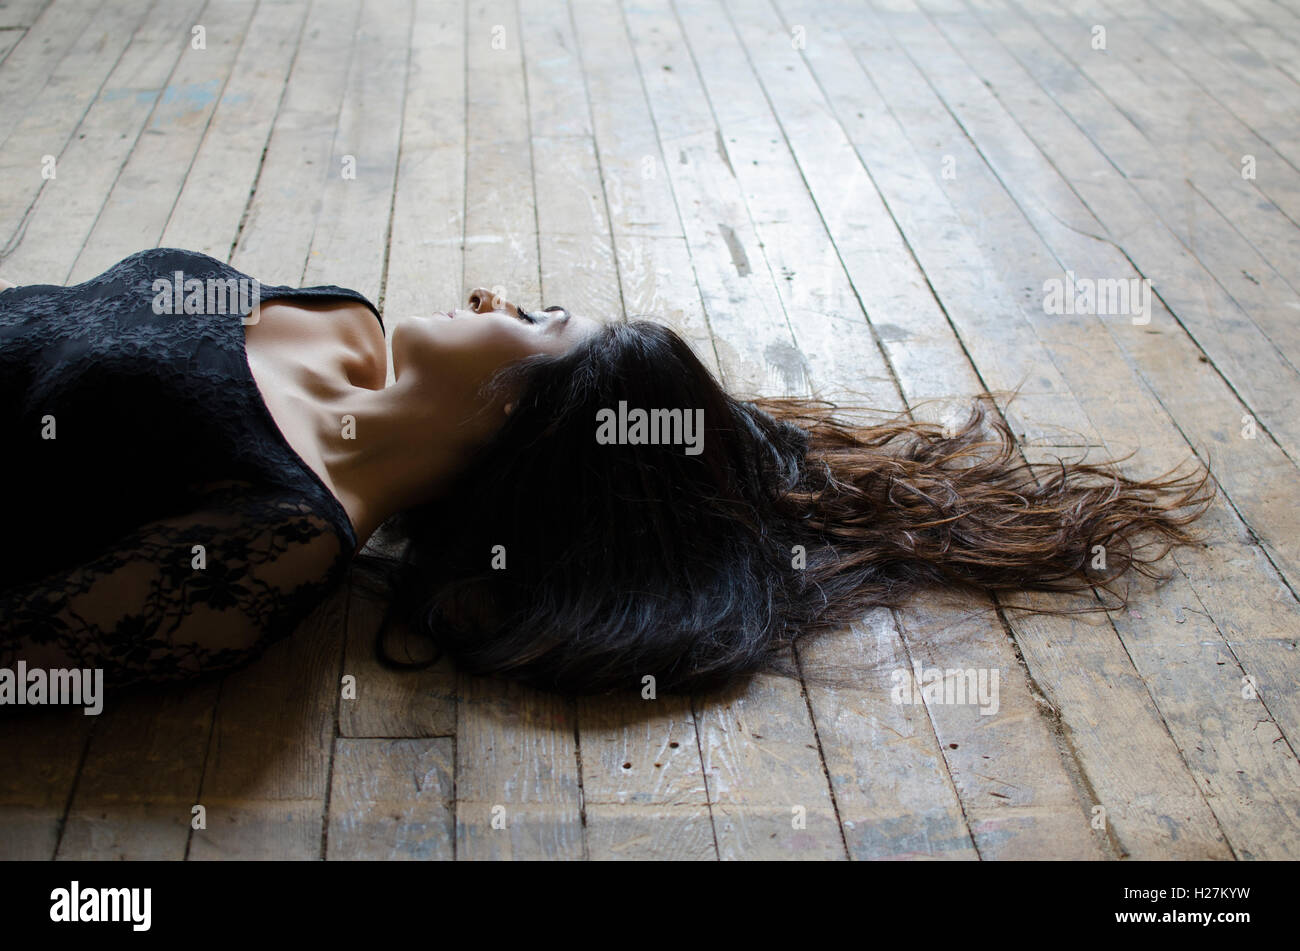 Woman With Long Dark Hair Laying Down On The Floor Stock Photo